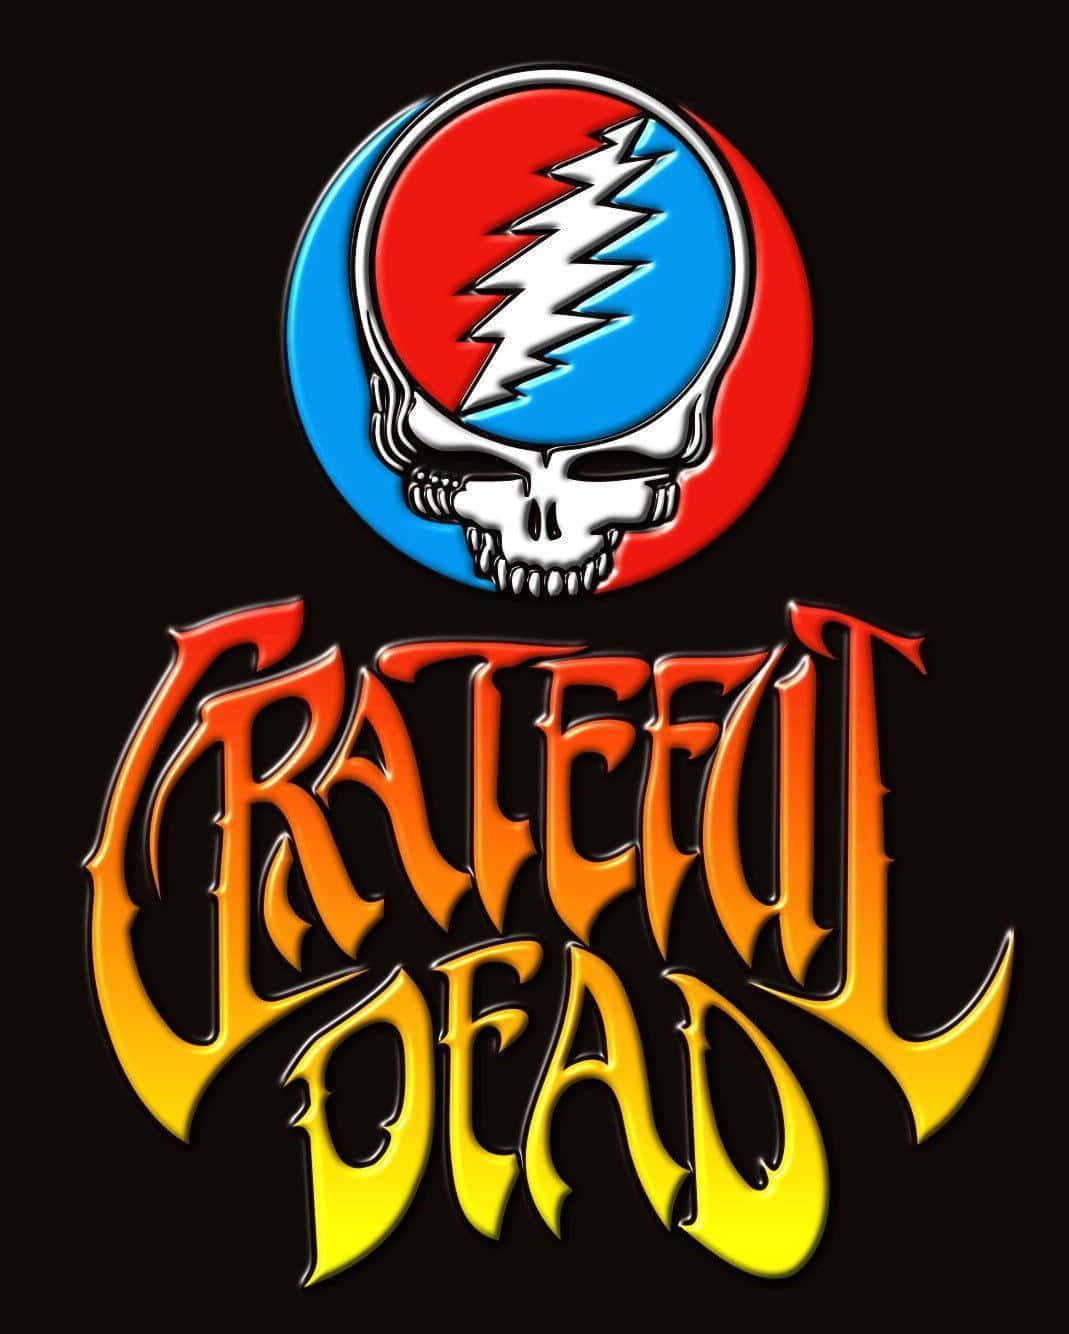 Relive classic Grateful Dead sounds with this iPhone Wallpaper